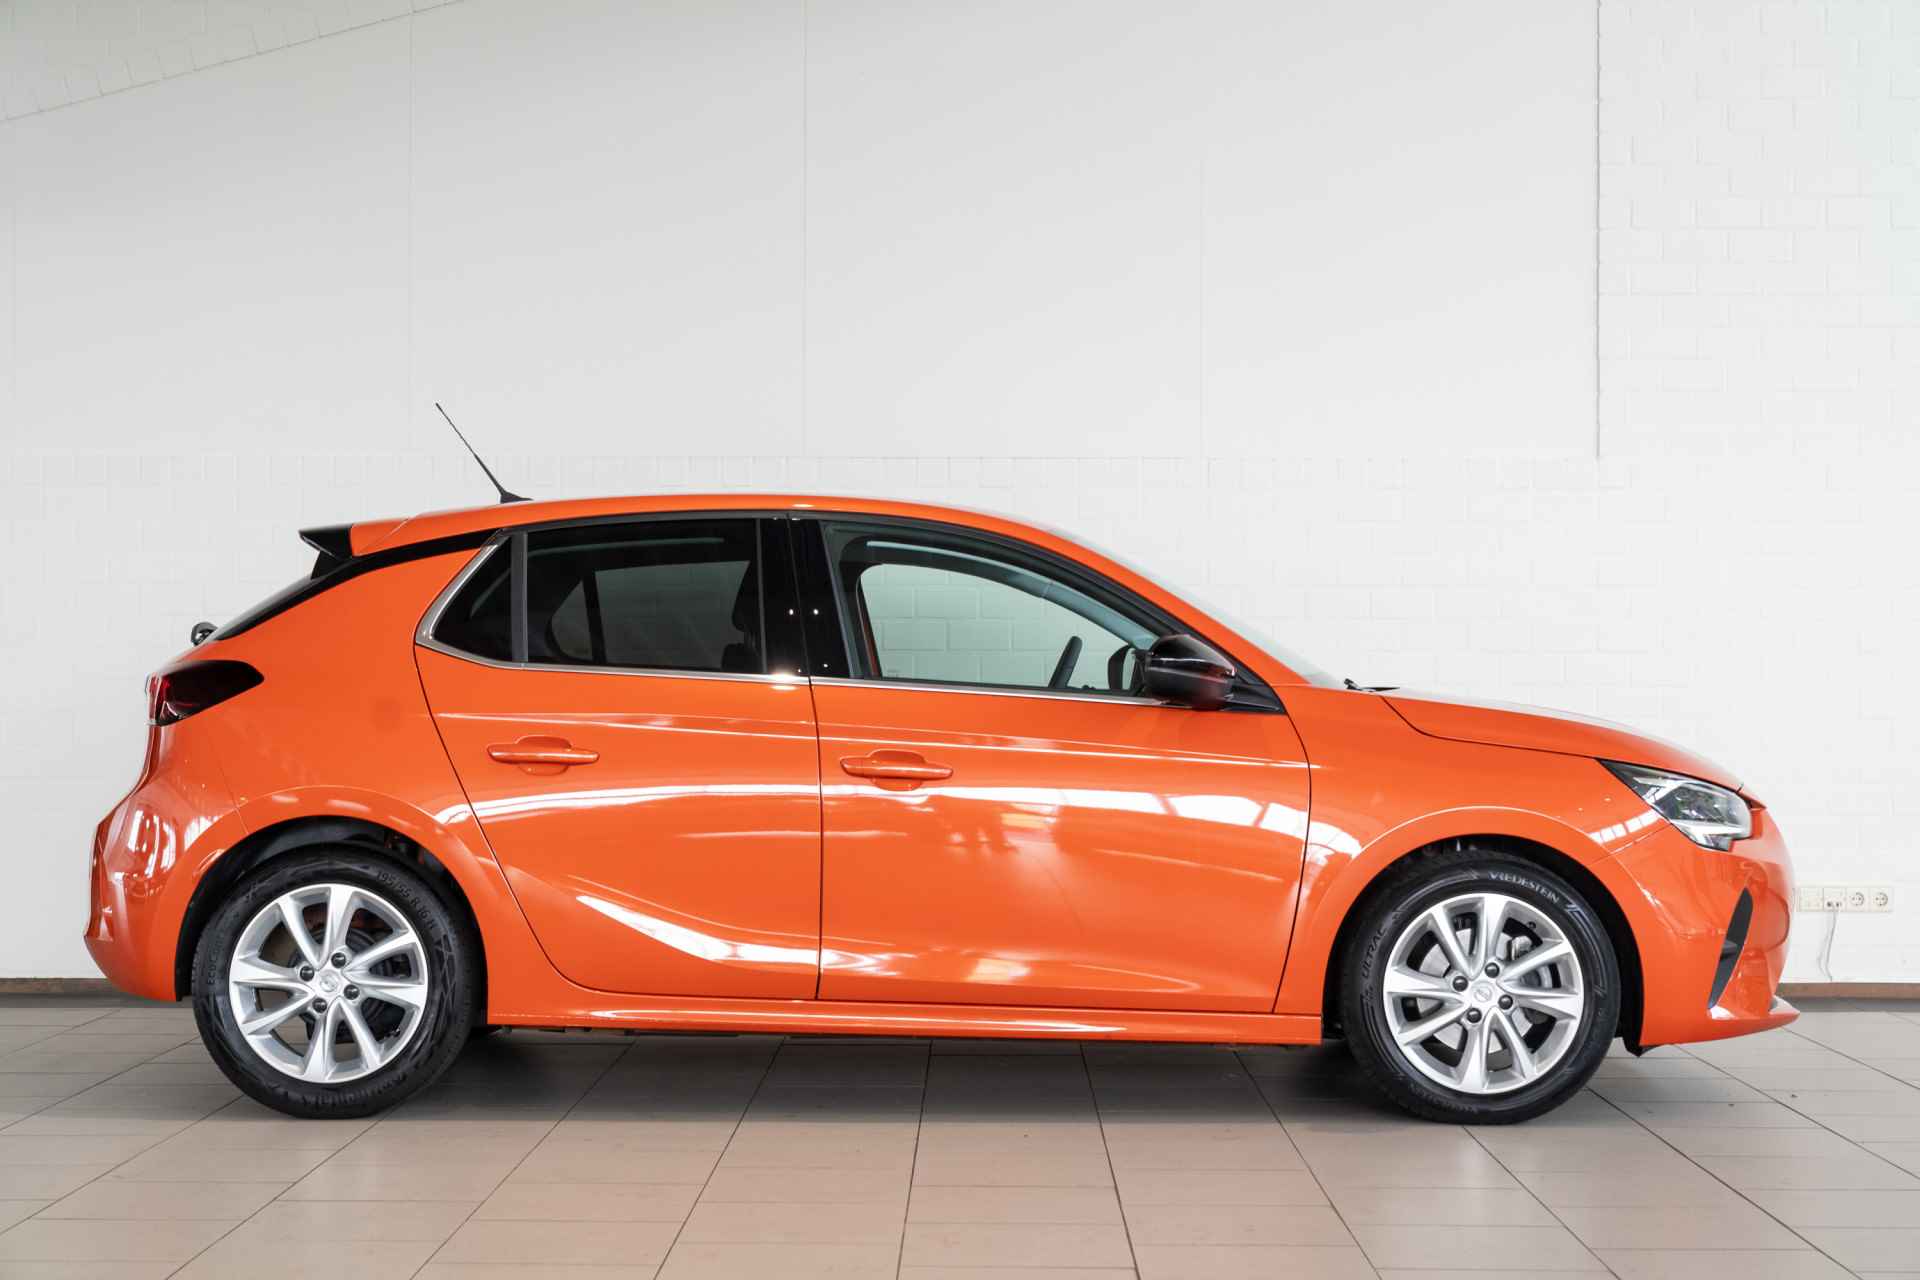 Opel Corsa 1.2 Turbo 100 PK Elegance | ORG NL AUTO! | Navigatie | Climate Controle | Donker Glas | Apple Carplay & Android Auto | - 6/32